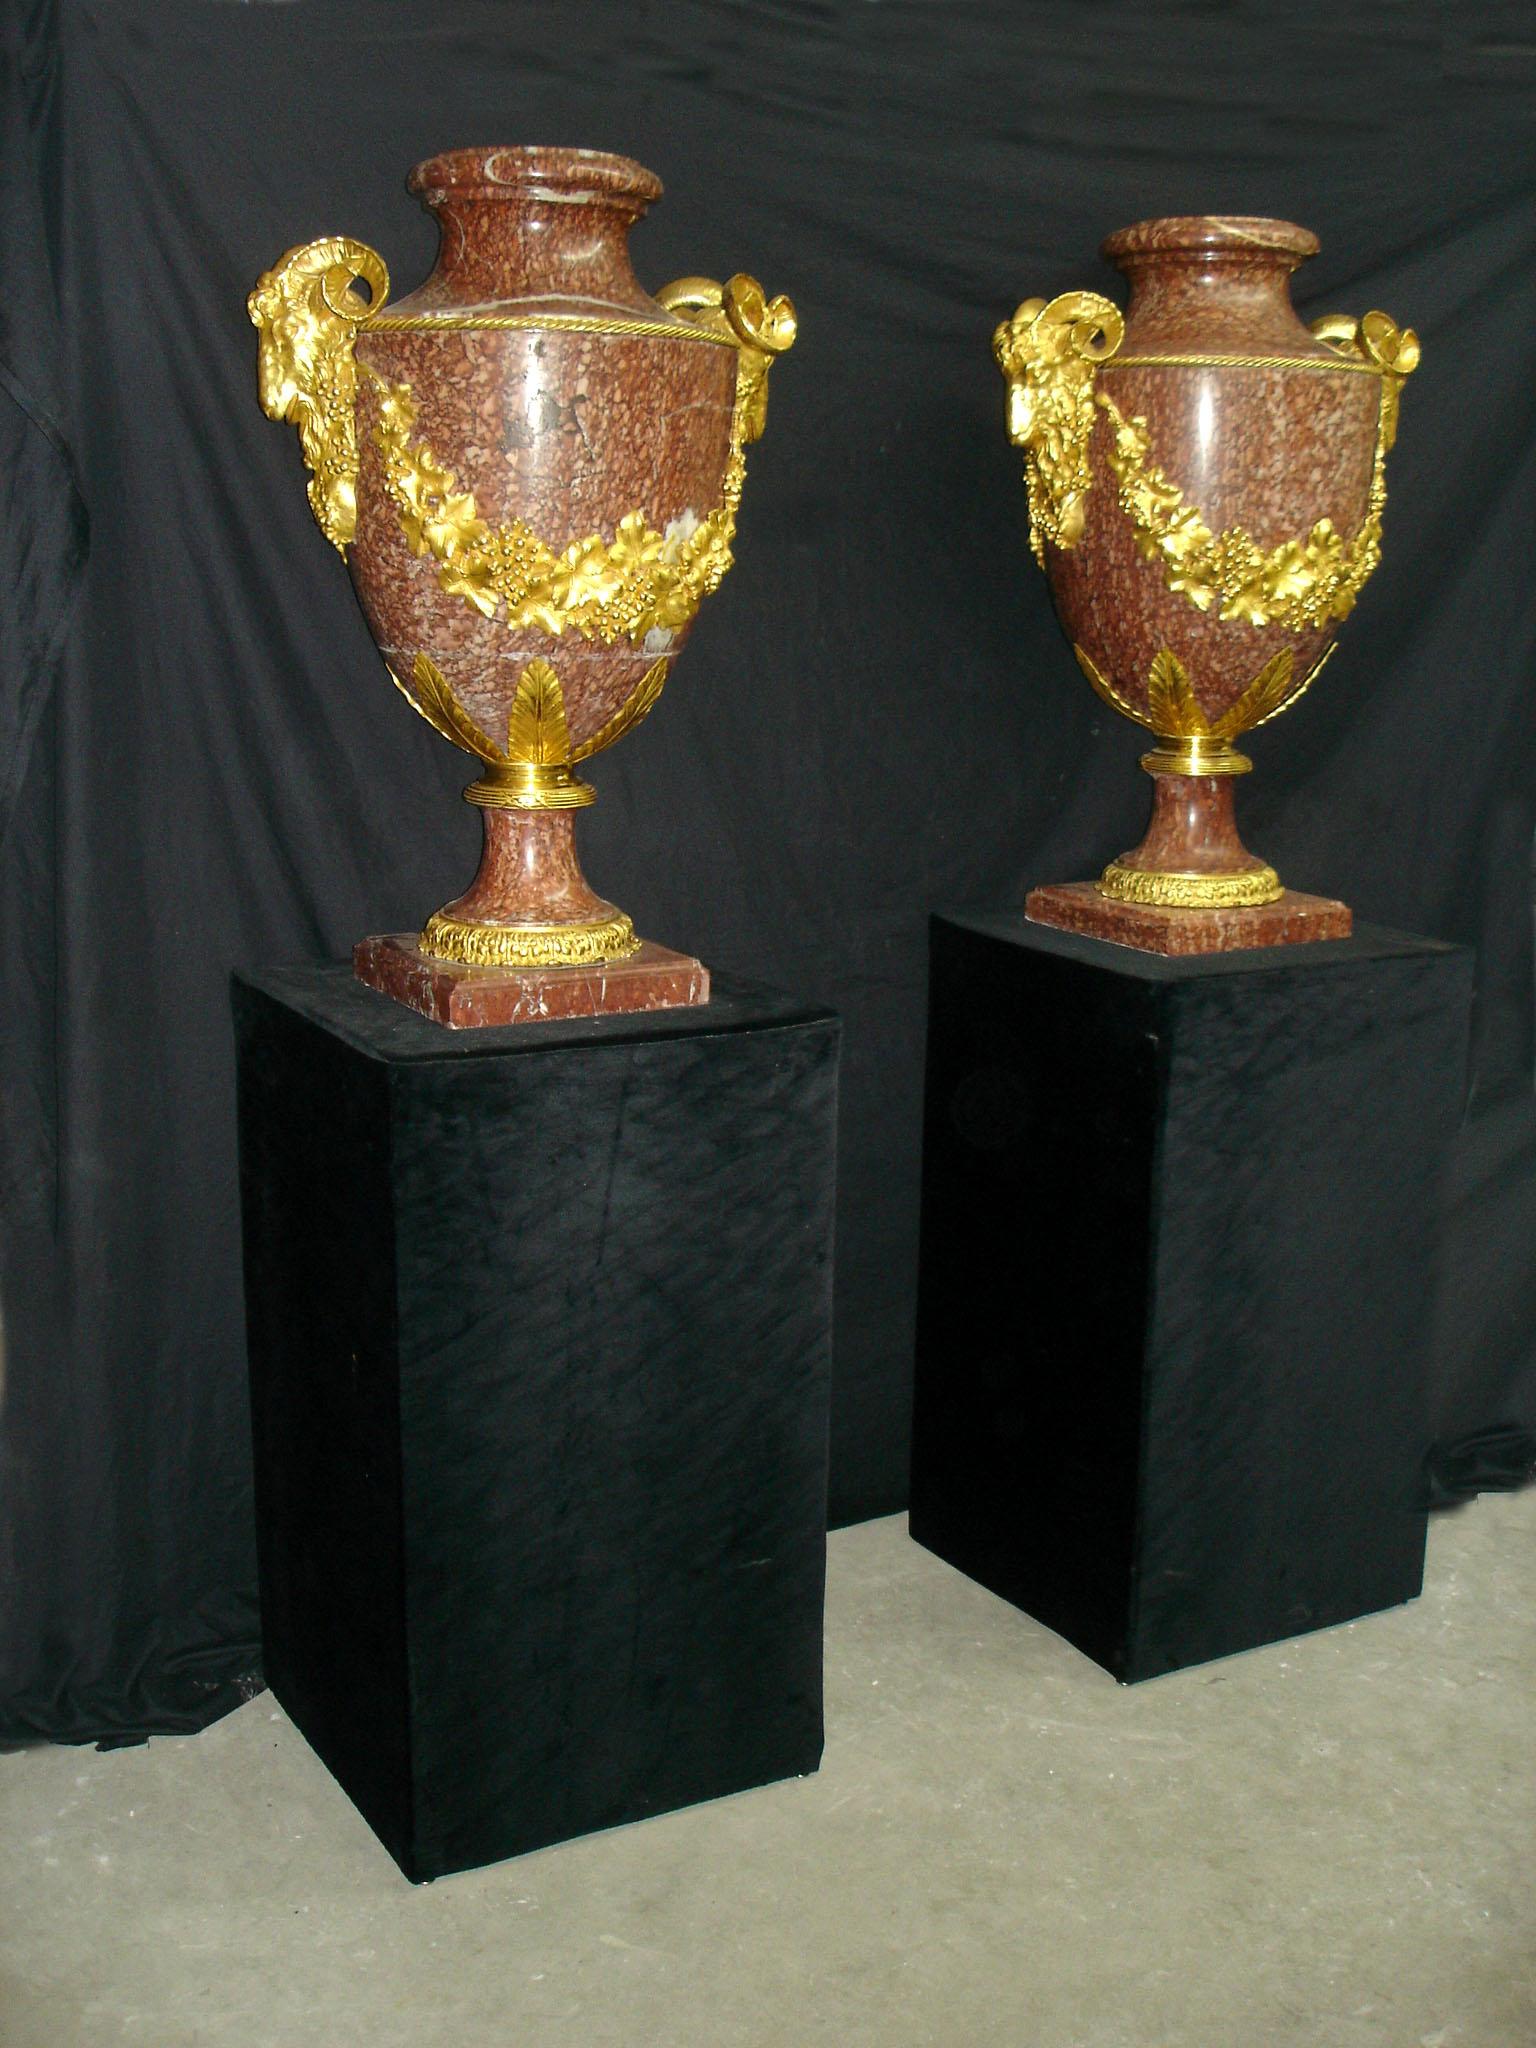 A large and impressive pair of late 19th century gilt bronze mounted rouge marble urns.

Each urn mounted with bronze ram heads connected by bronze wreaths.